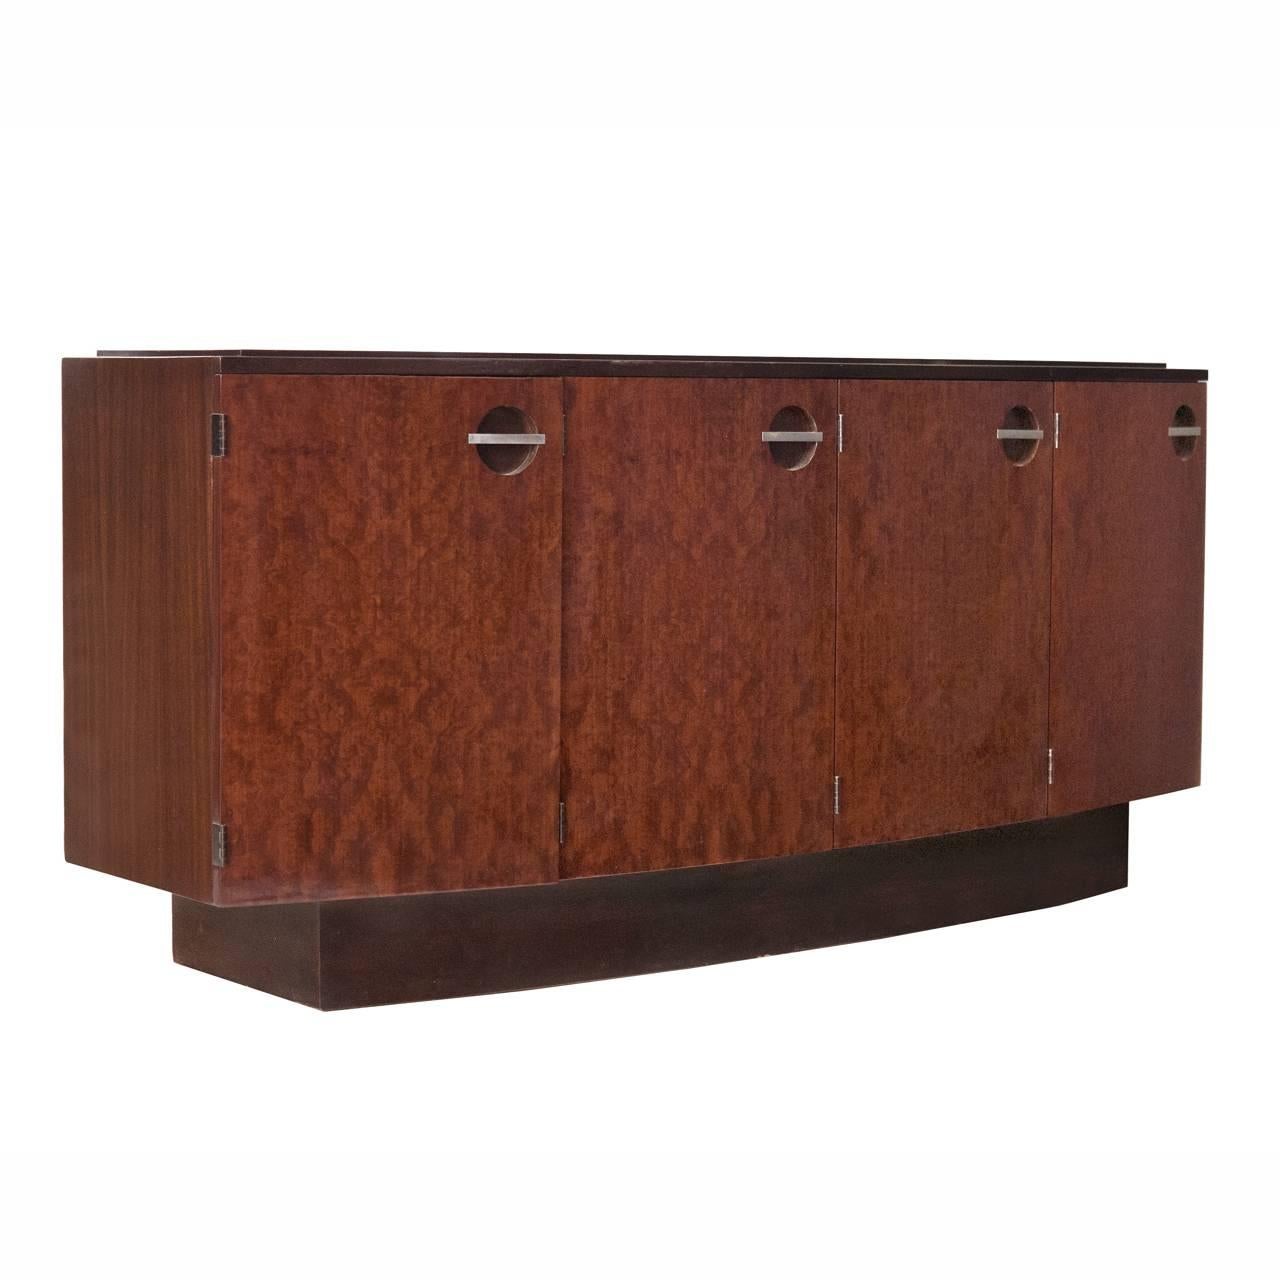 Art Deco Gilbert Rohde Sideboard For Sale